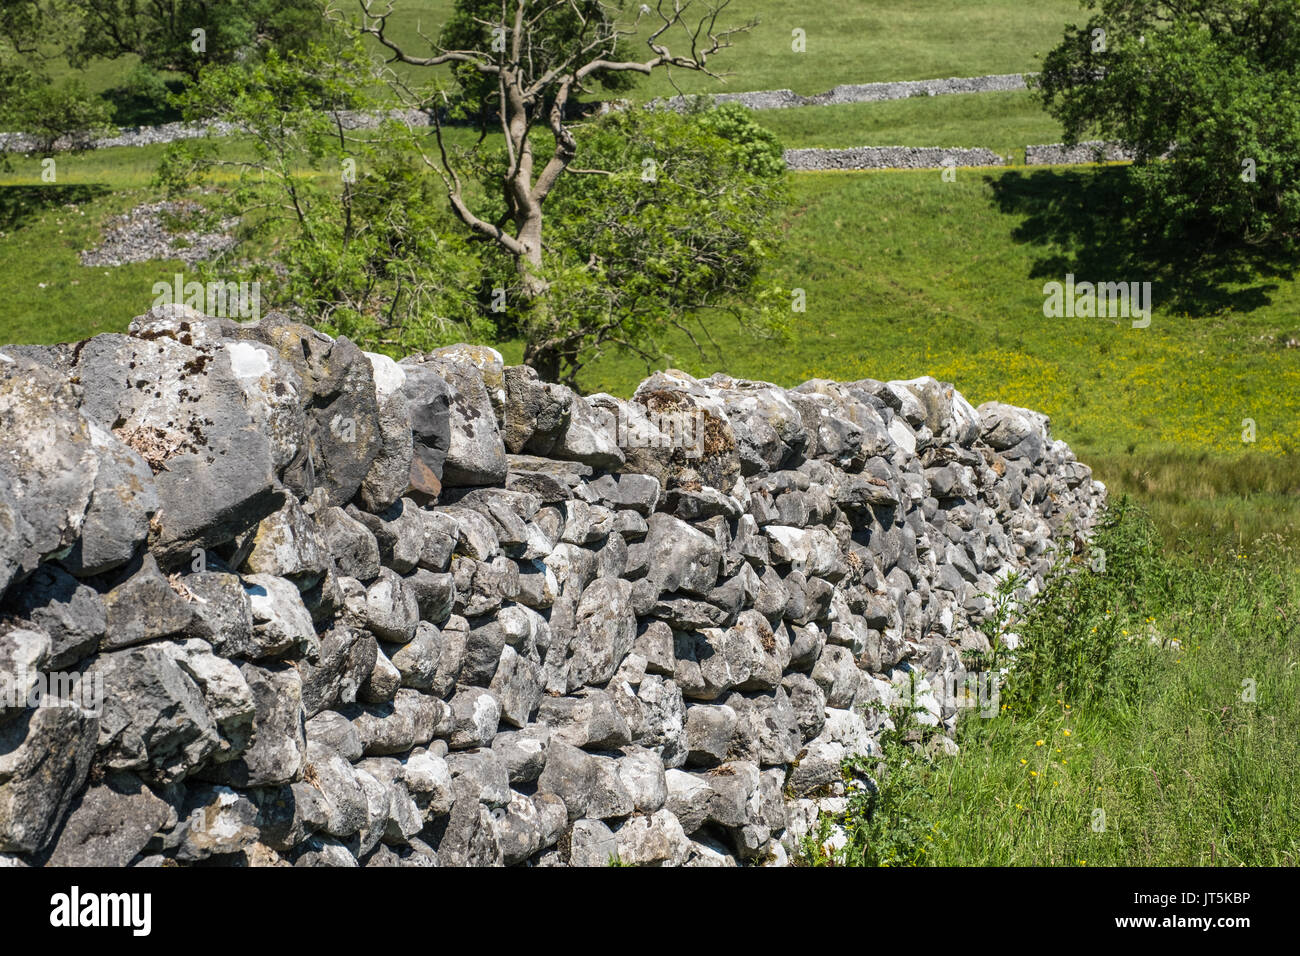 A Typical Dry Stone Wall at Malham North Yorkshire, UK Stock Photo